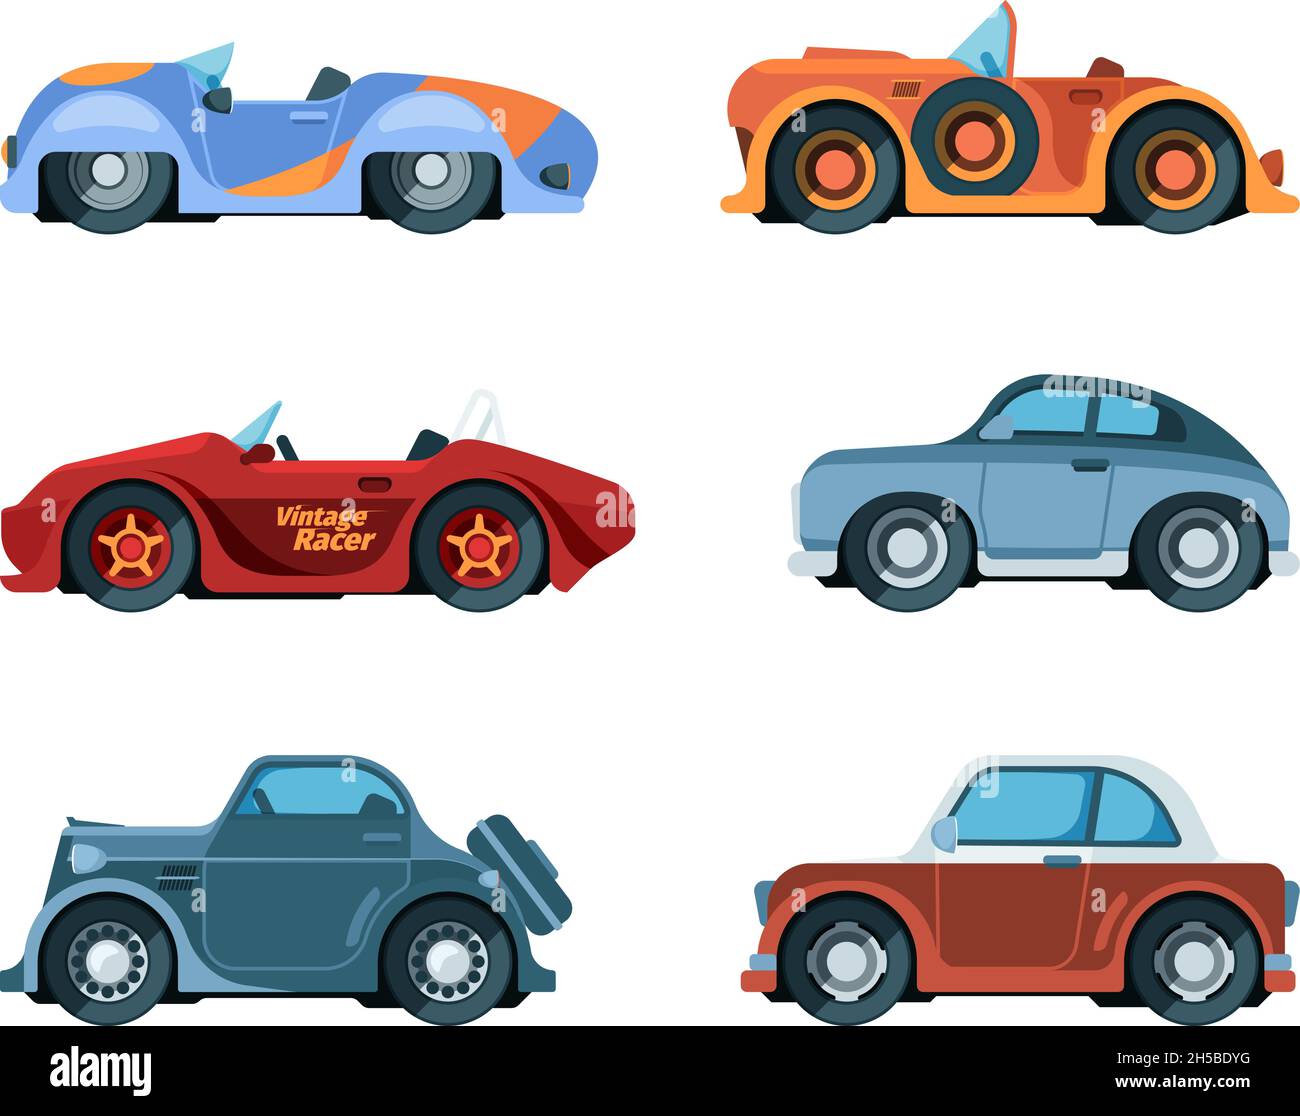 Old car in traffic Stock Vector Images - Alamy